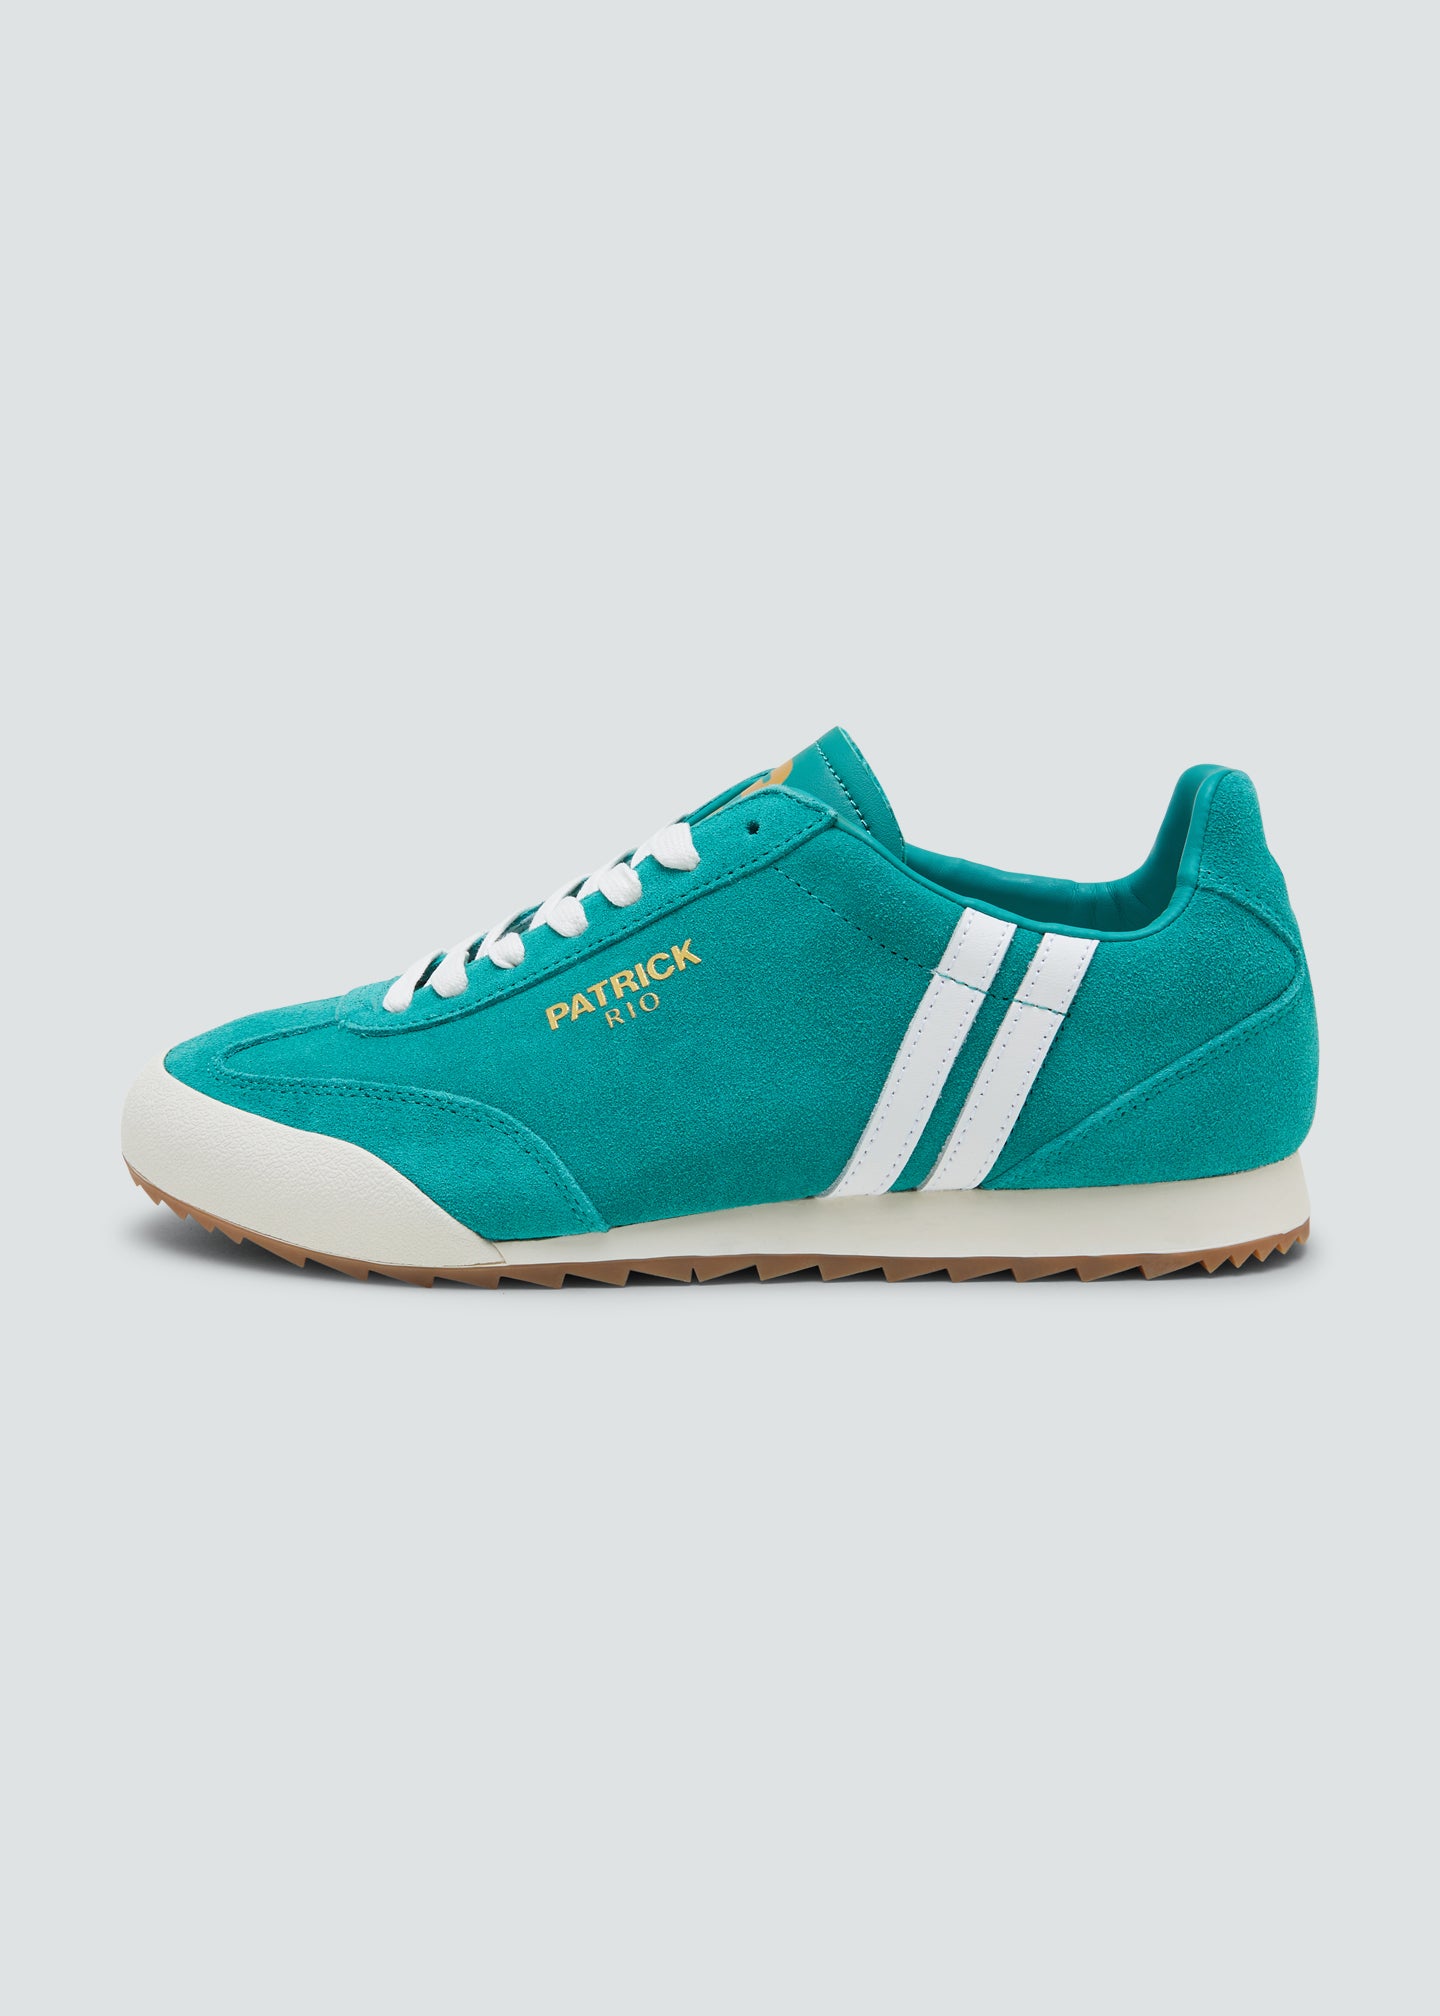 Patrick Rio Trainer - Teal - Side